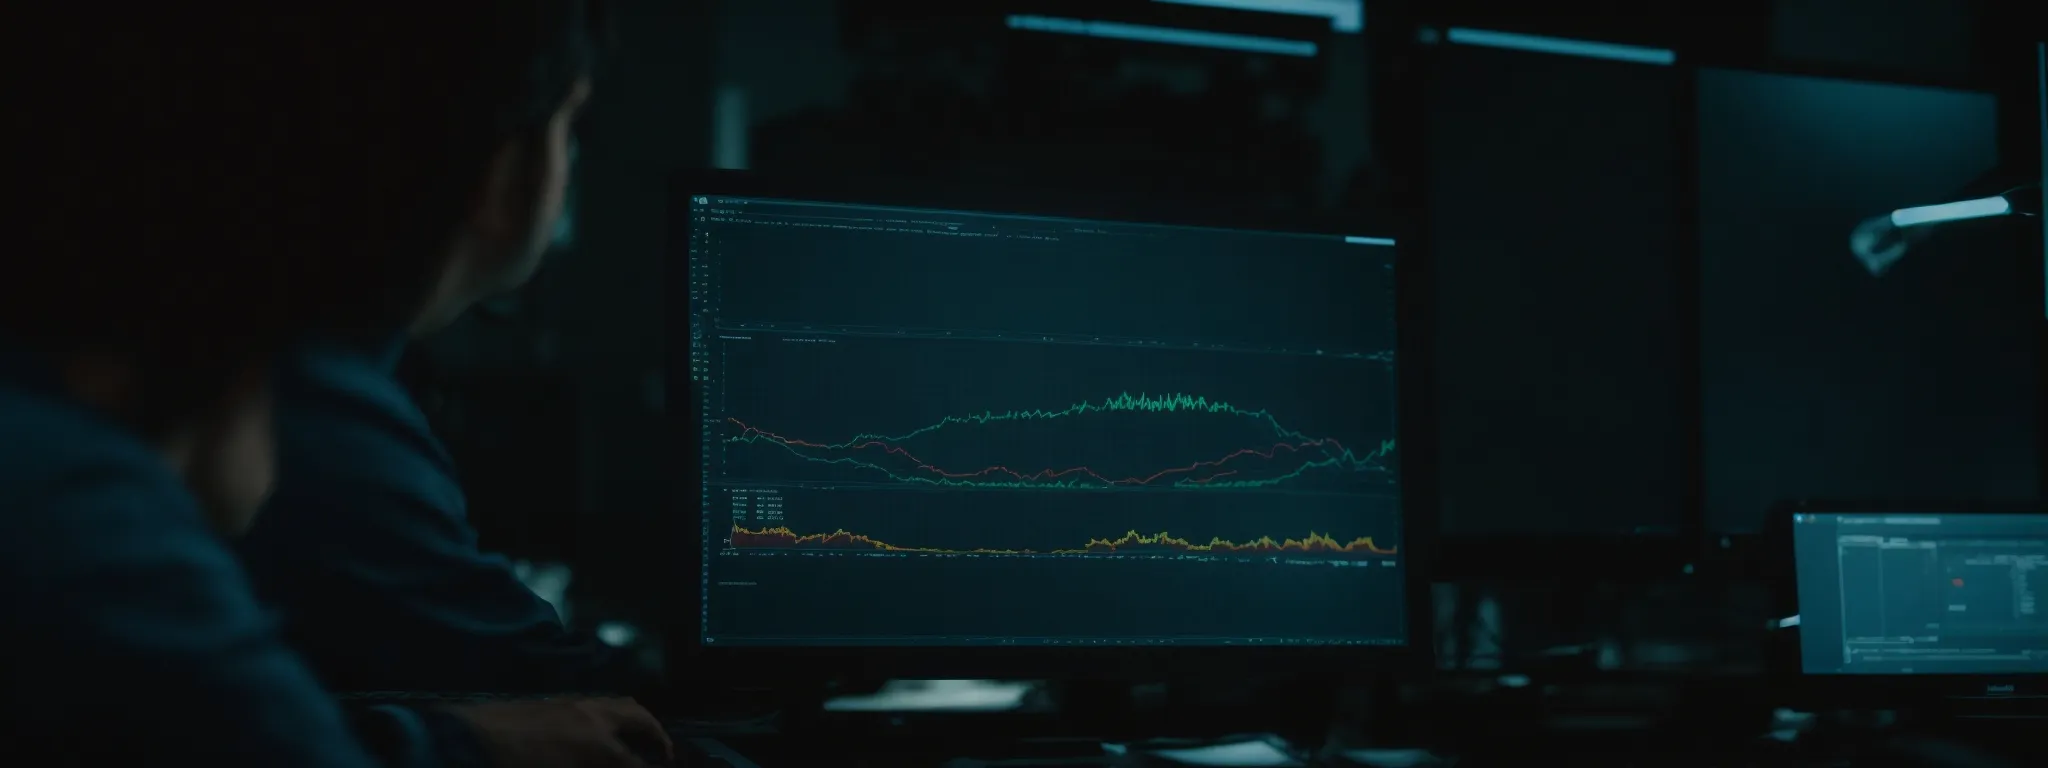 a professional analyzing graphs and charts on a computer screen related to video performance metrics.